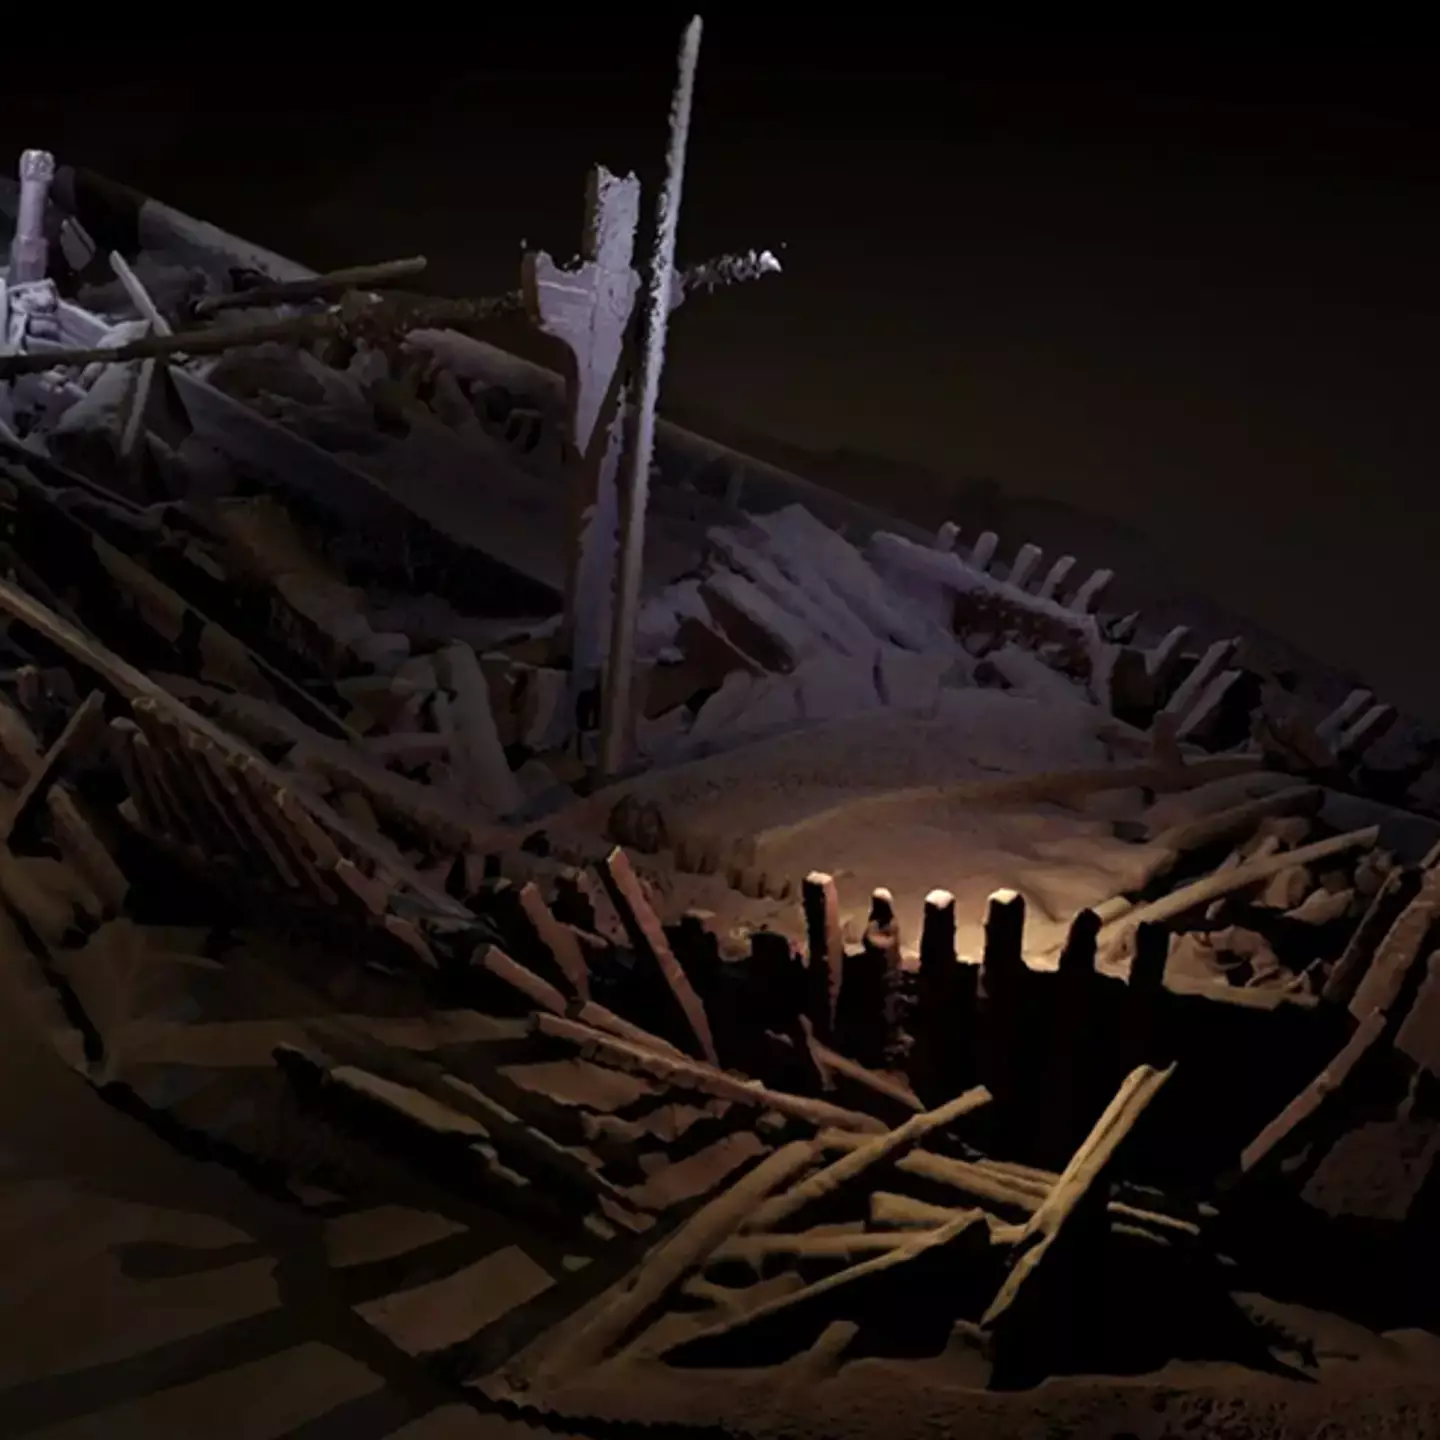 2,400-year-old vessel found perfectly preserved at the bottom of the Black Sea thought to be world’s oldest shipwreck